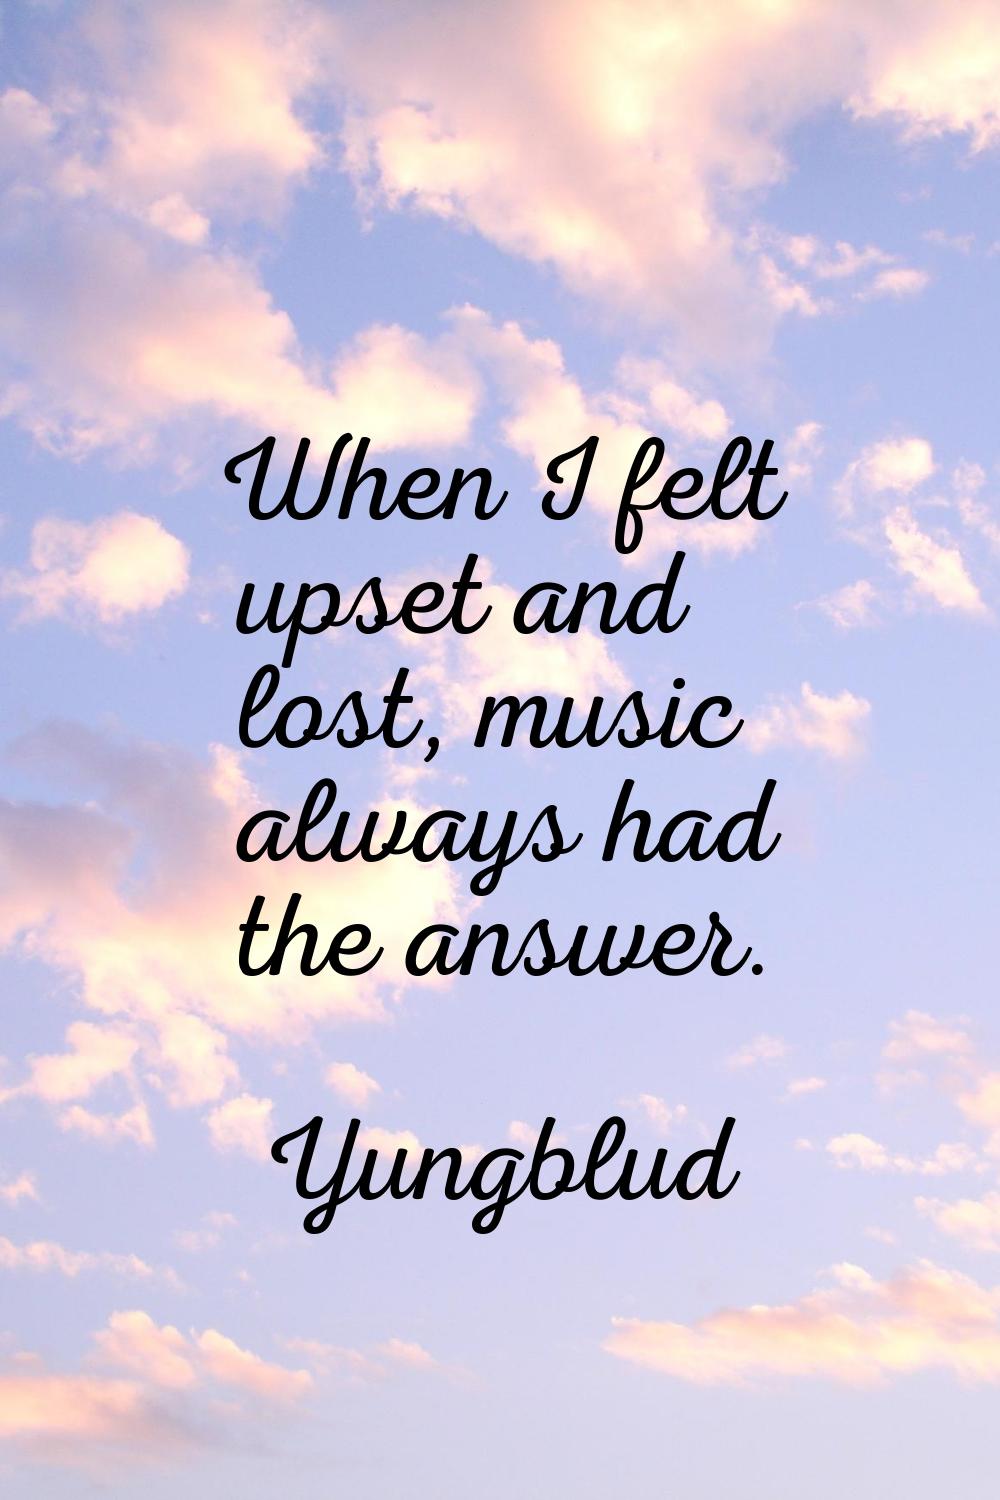 When I felt upset and lost, music always had the answer.